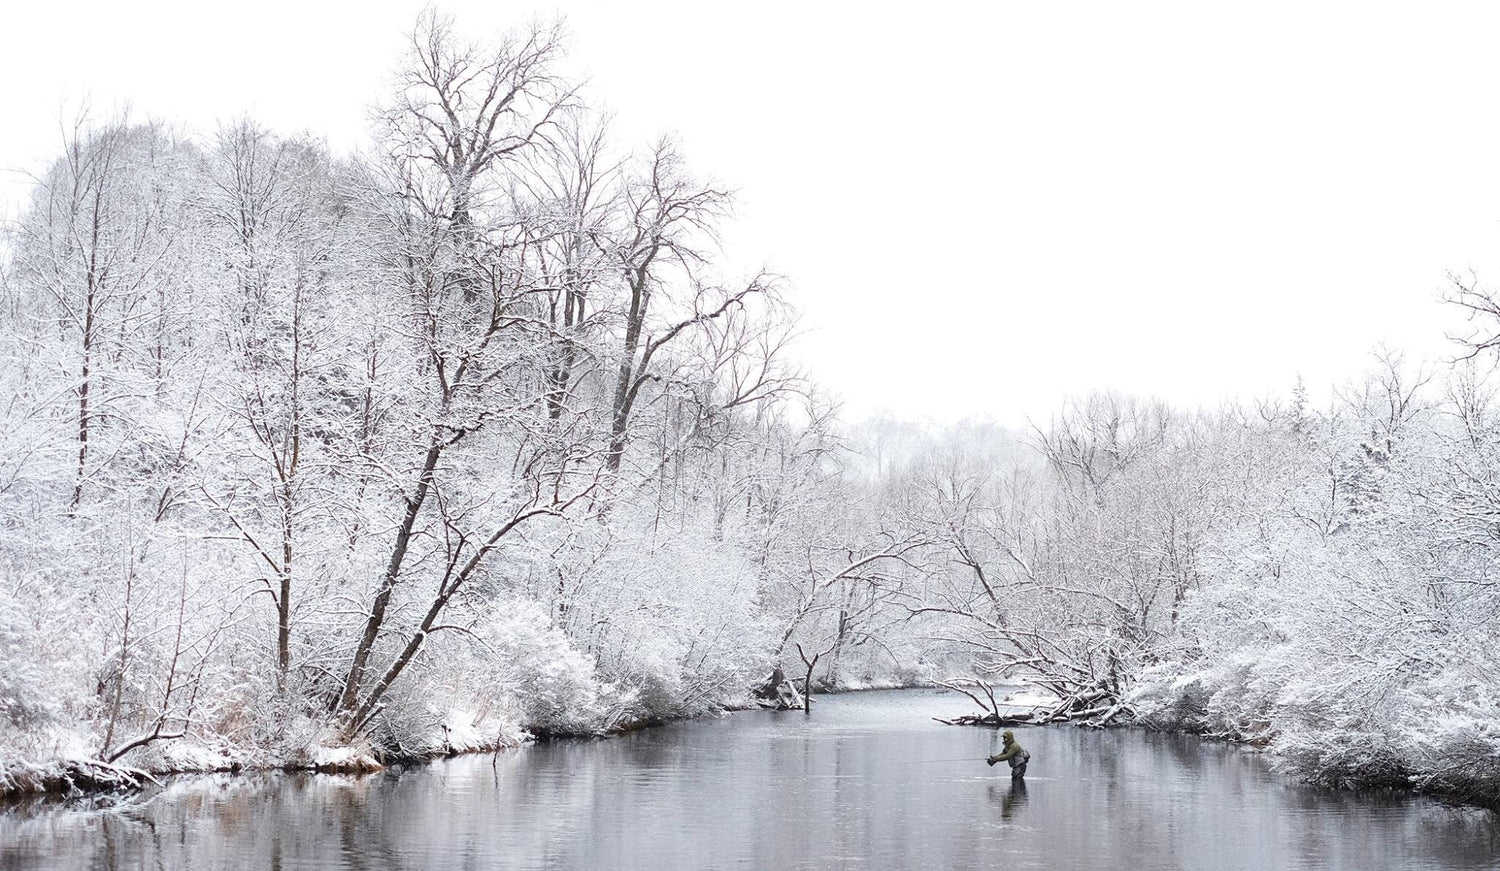 Image of Bret fly fishing in a river amongst snowy trees